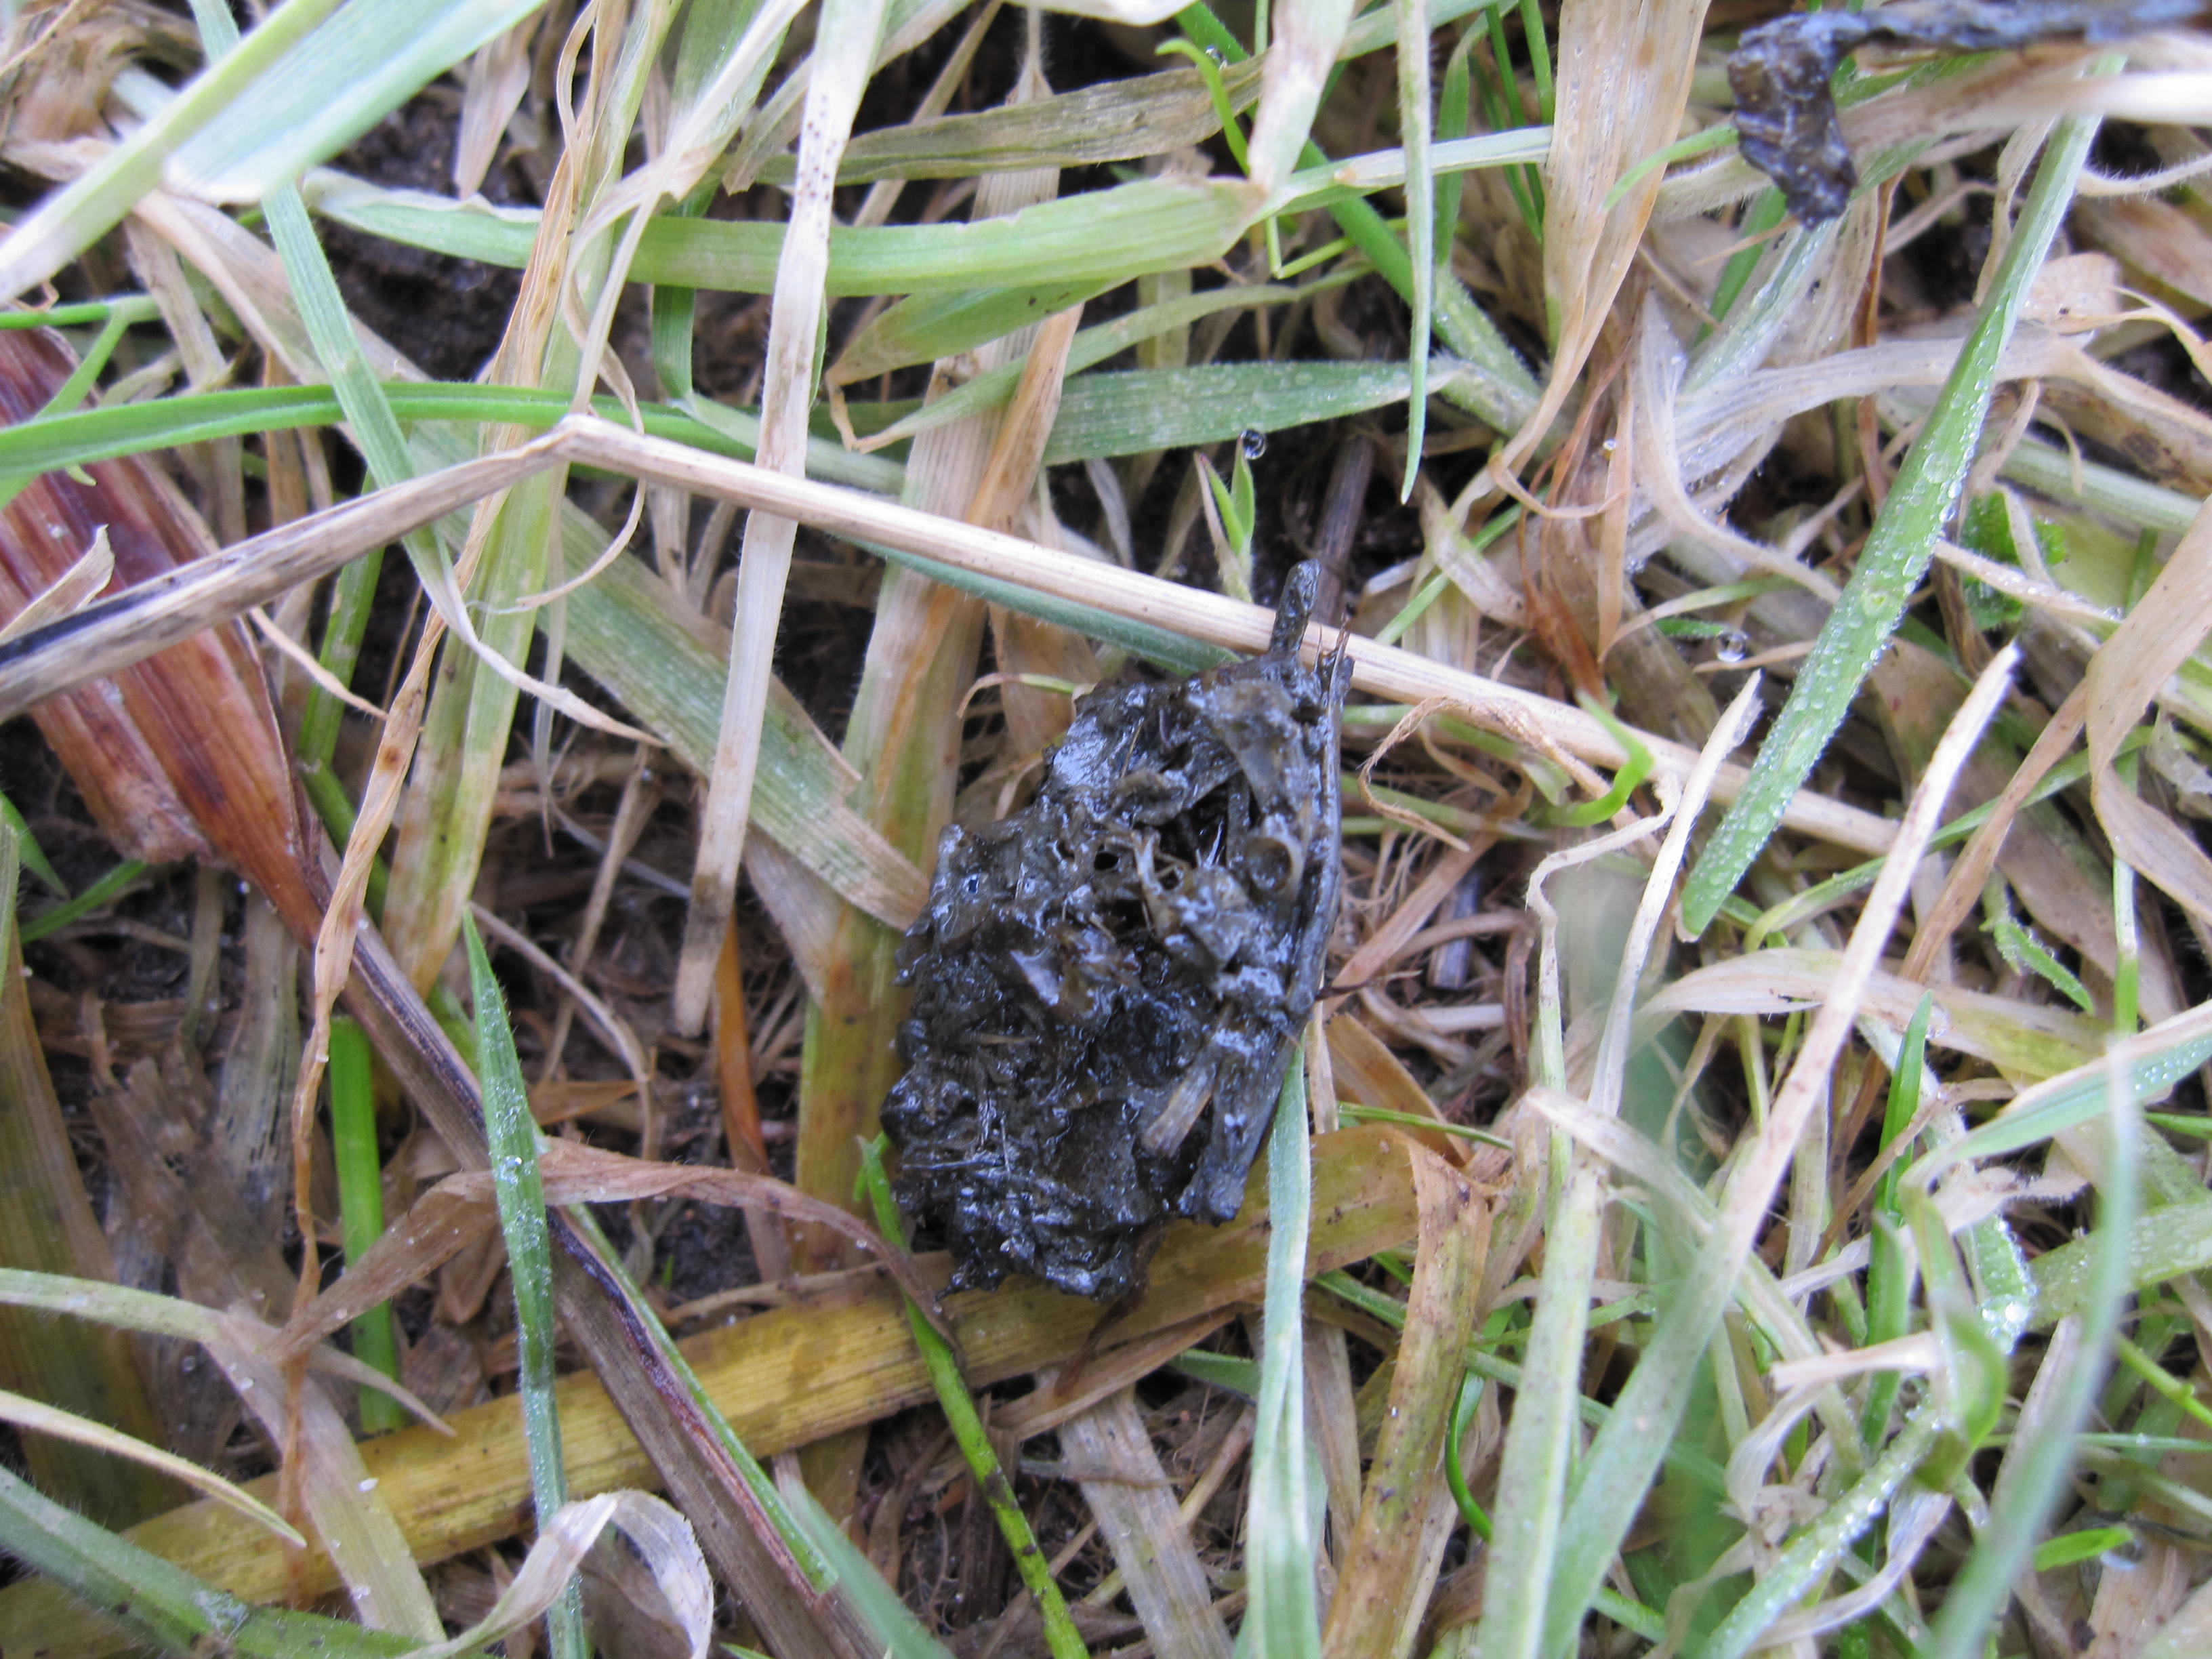 Otter spraint acts as a territorial marker and is also a useful tool for identifying the presence of otters in an area